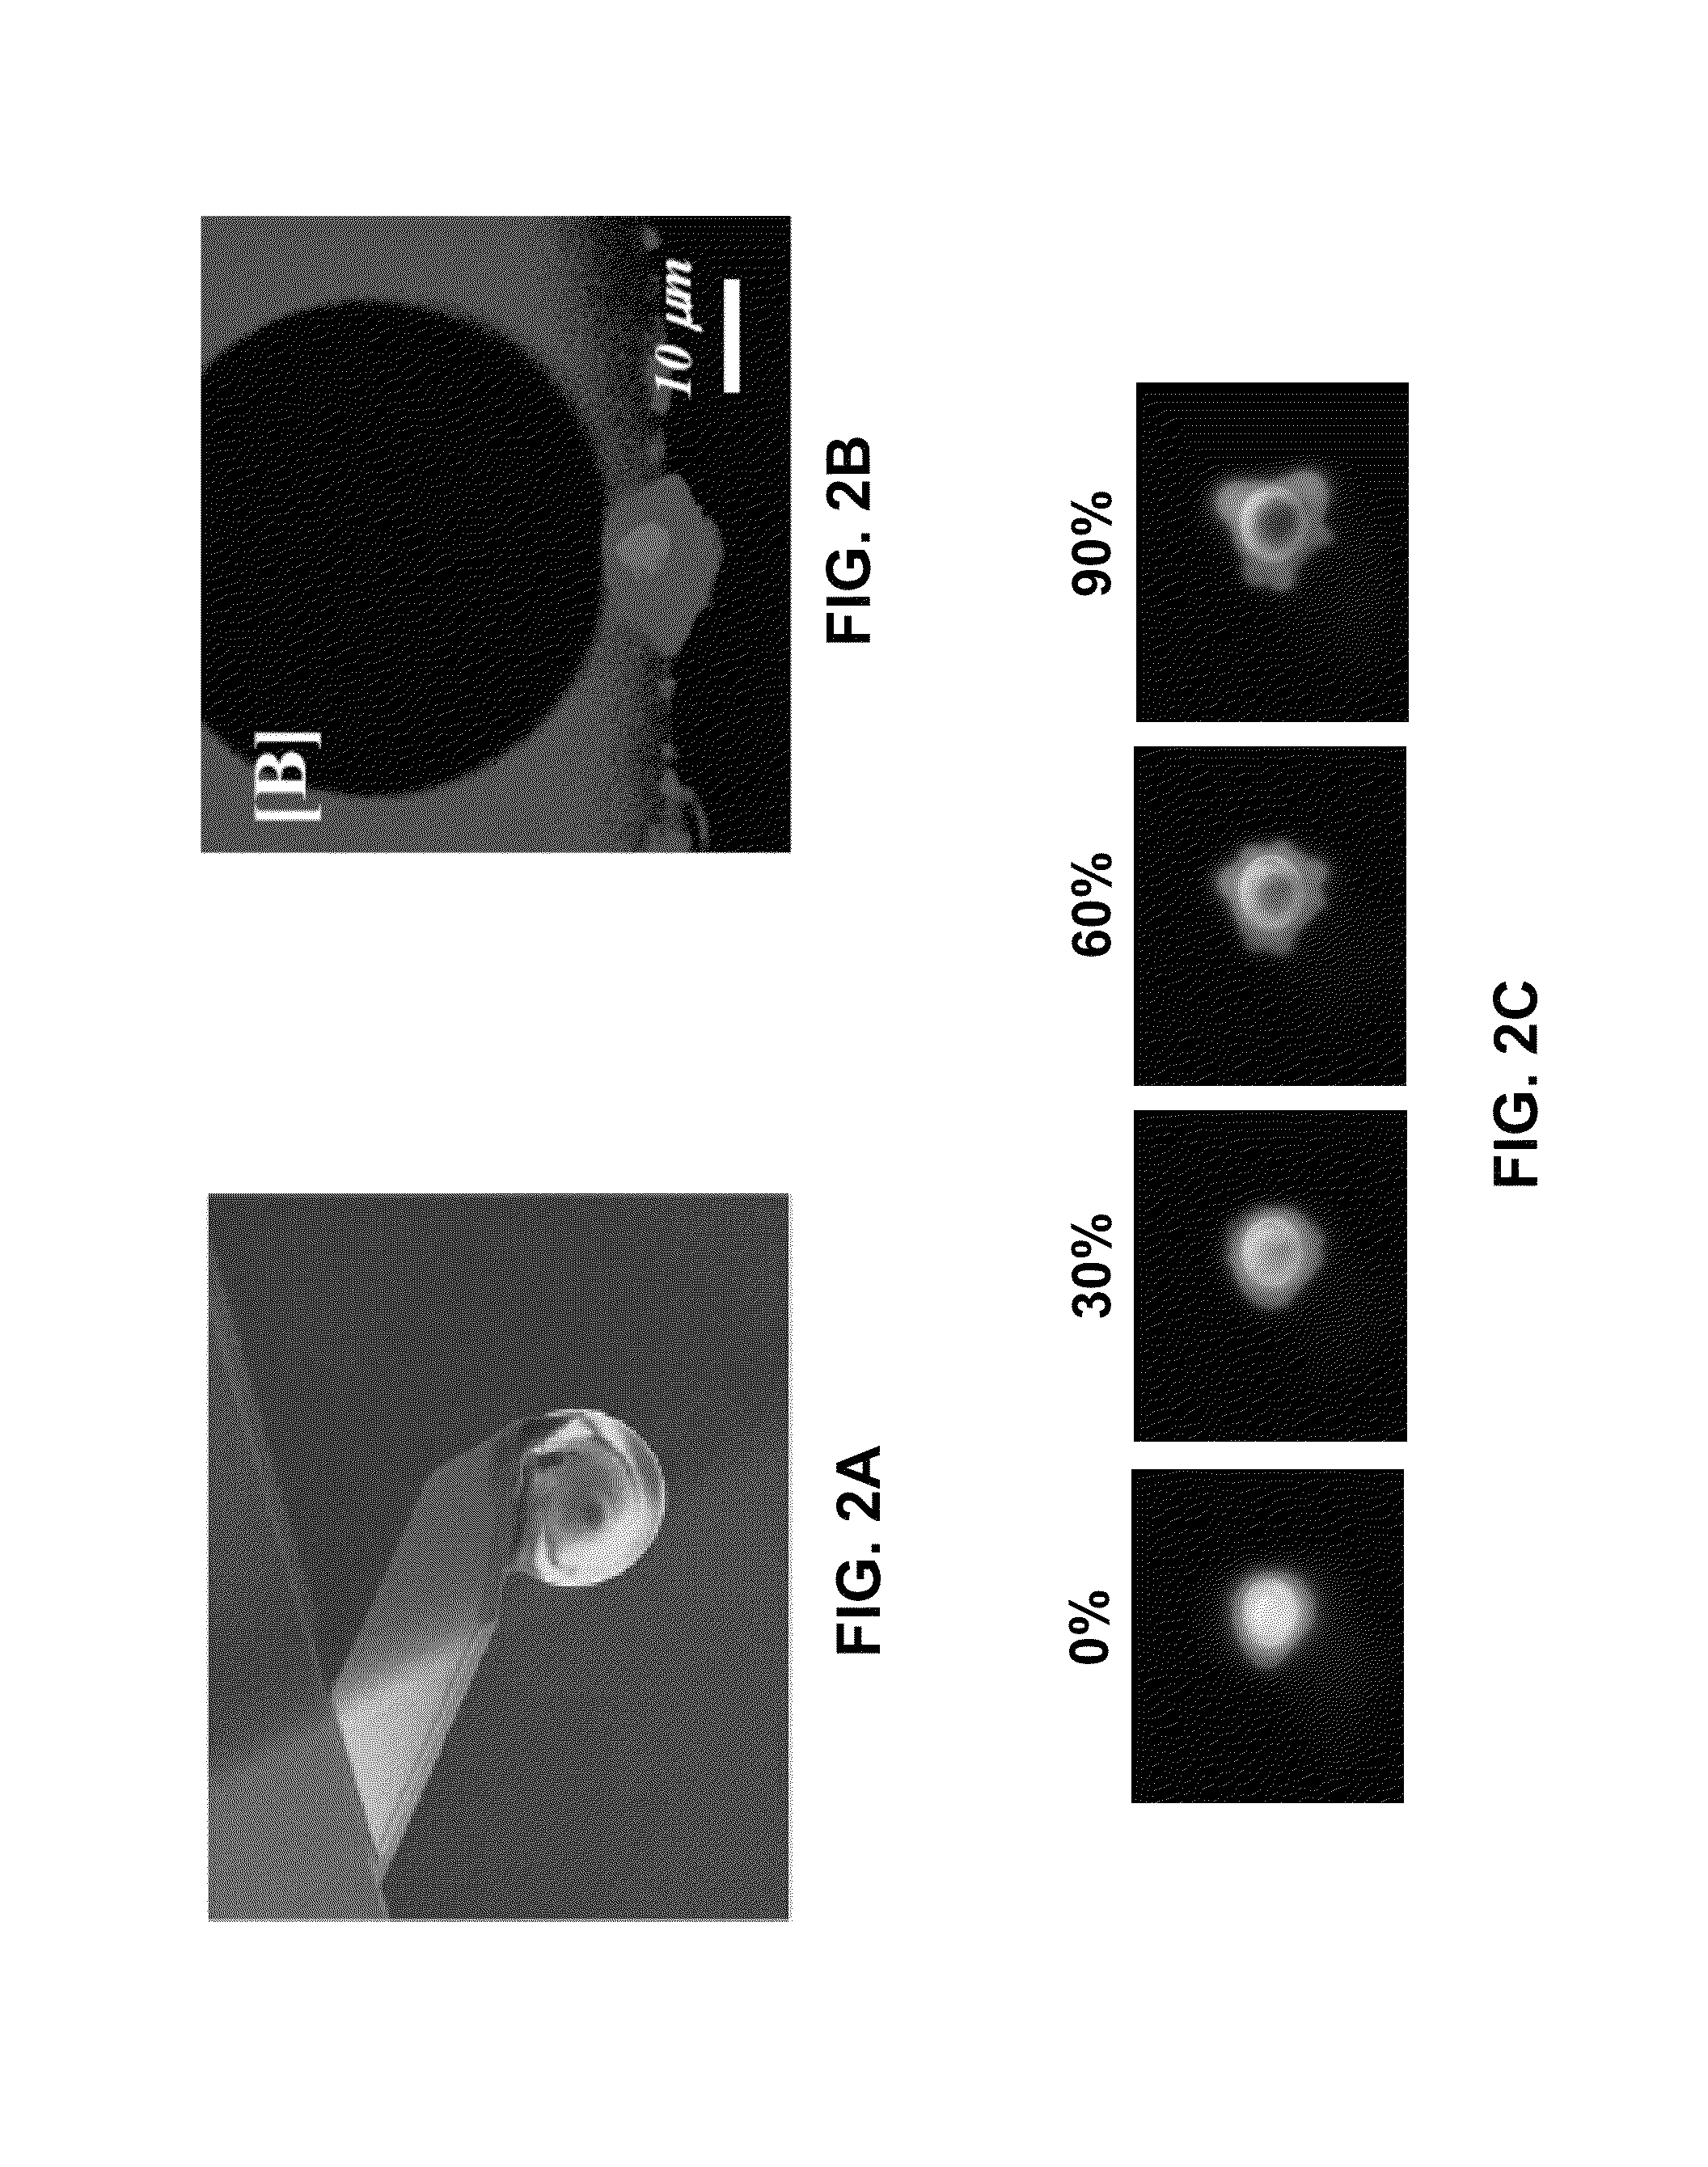 Method and system for measuring single cell mechanics using a modified scanning probe microscope